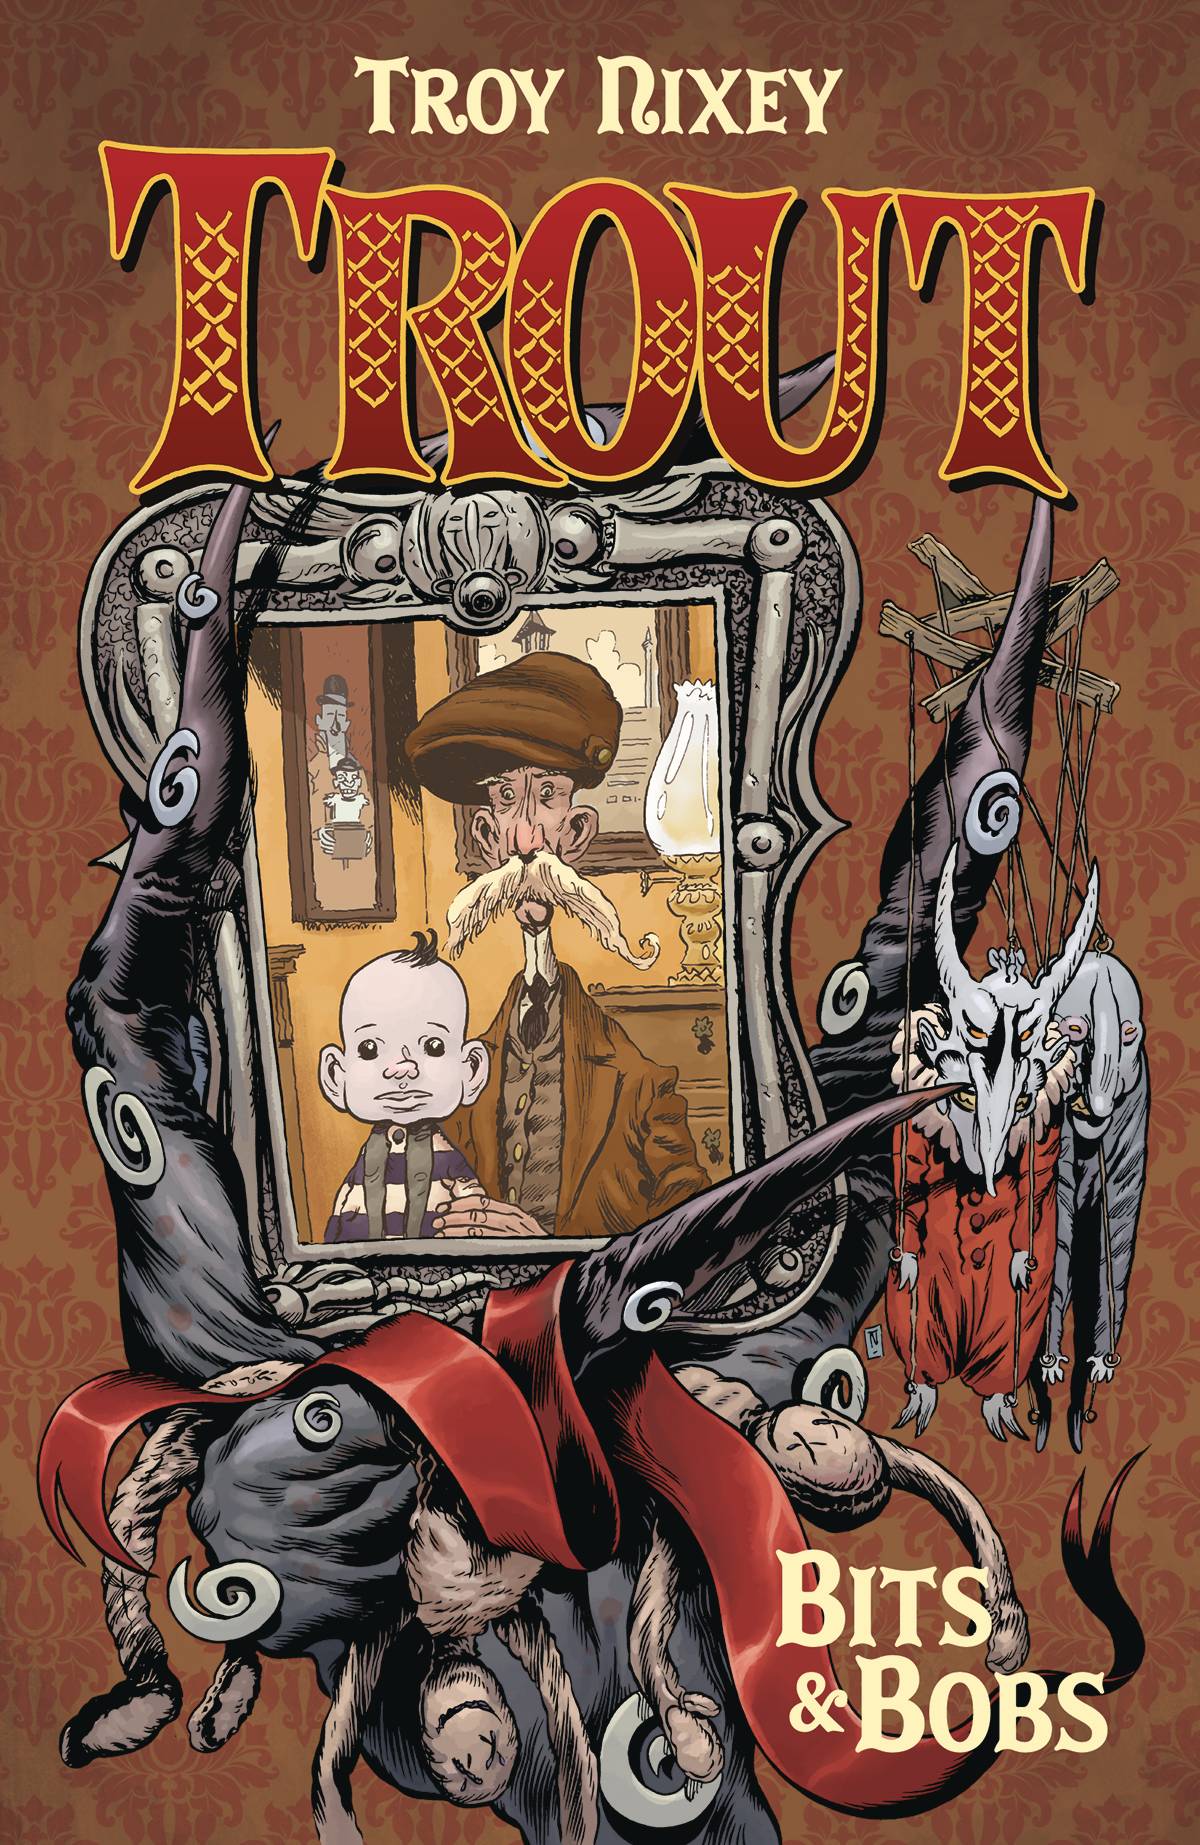 Trout Hardcover Volume 1 Bits & Bobs